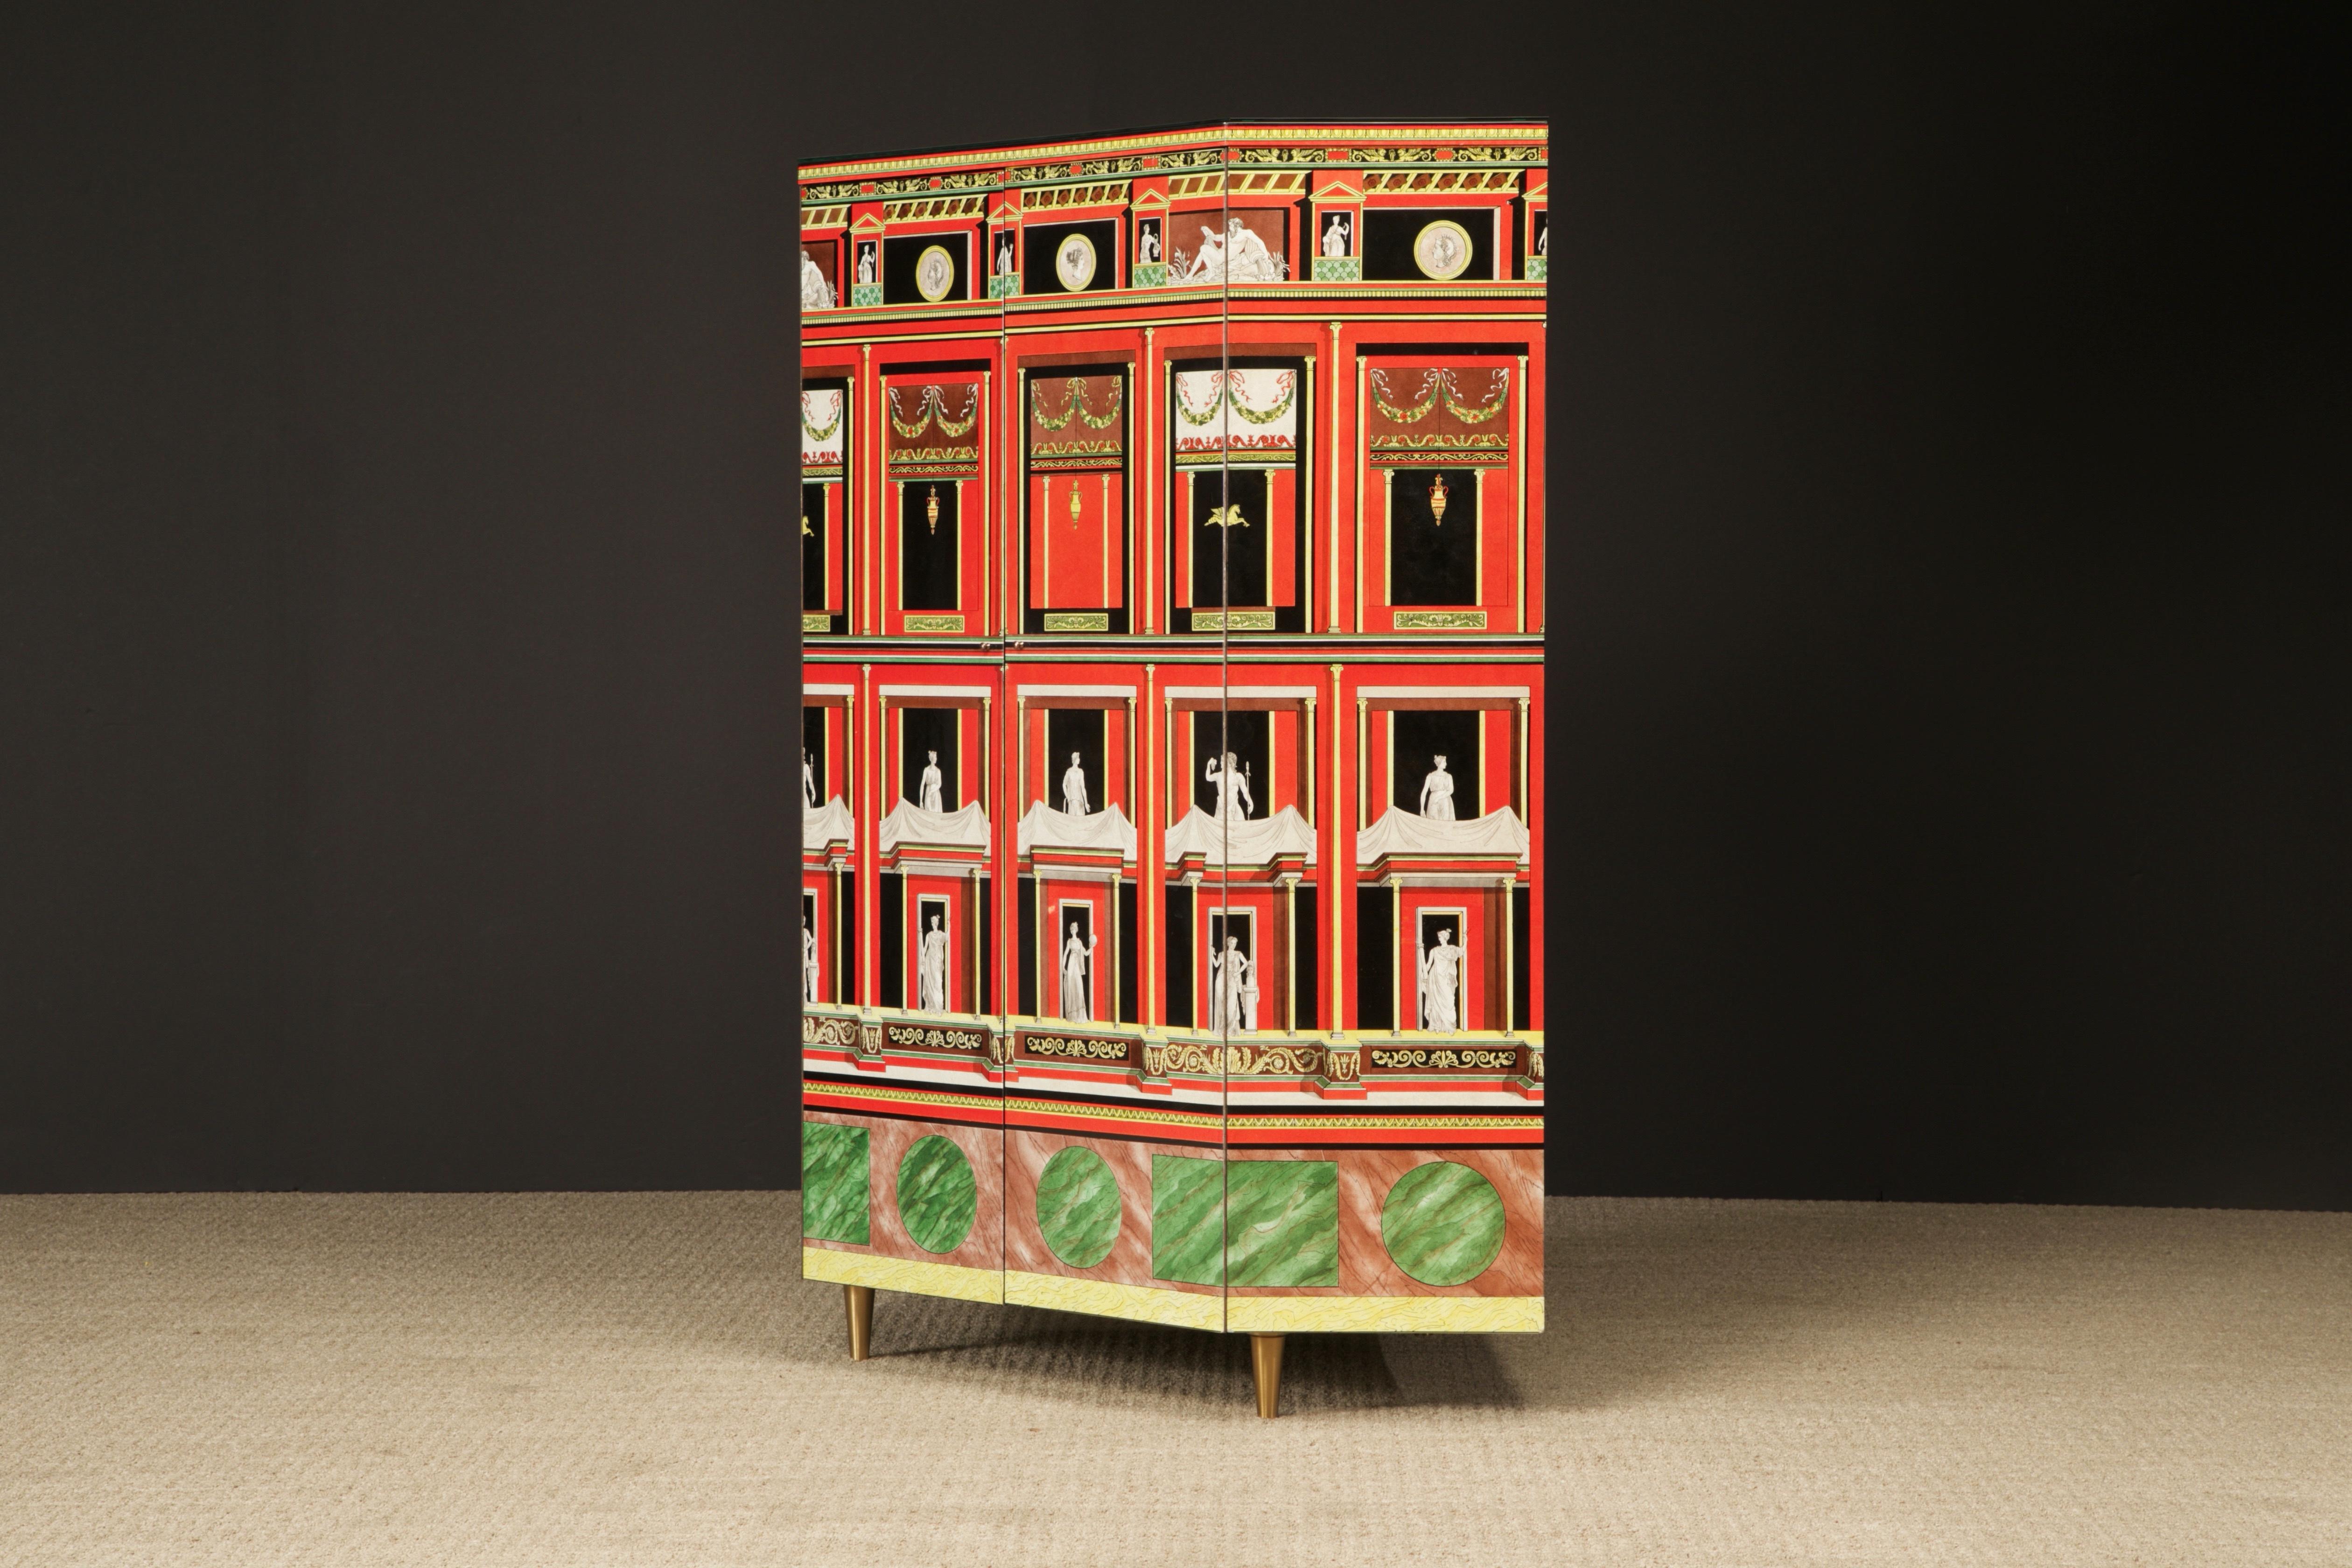 Wood 'Pompeiana' Corner Cabinet by Piero Fornasetti, Italy, 2 of 2 in 1988, Signed  For Sale